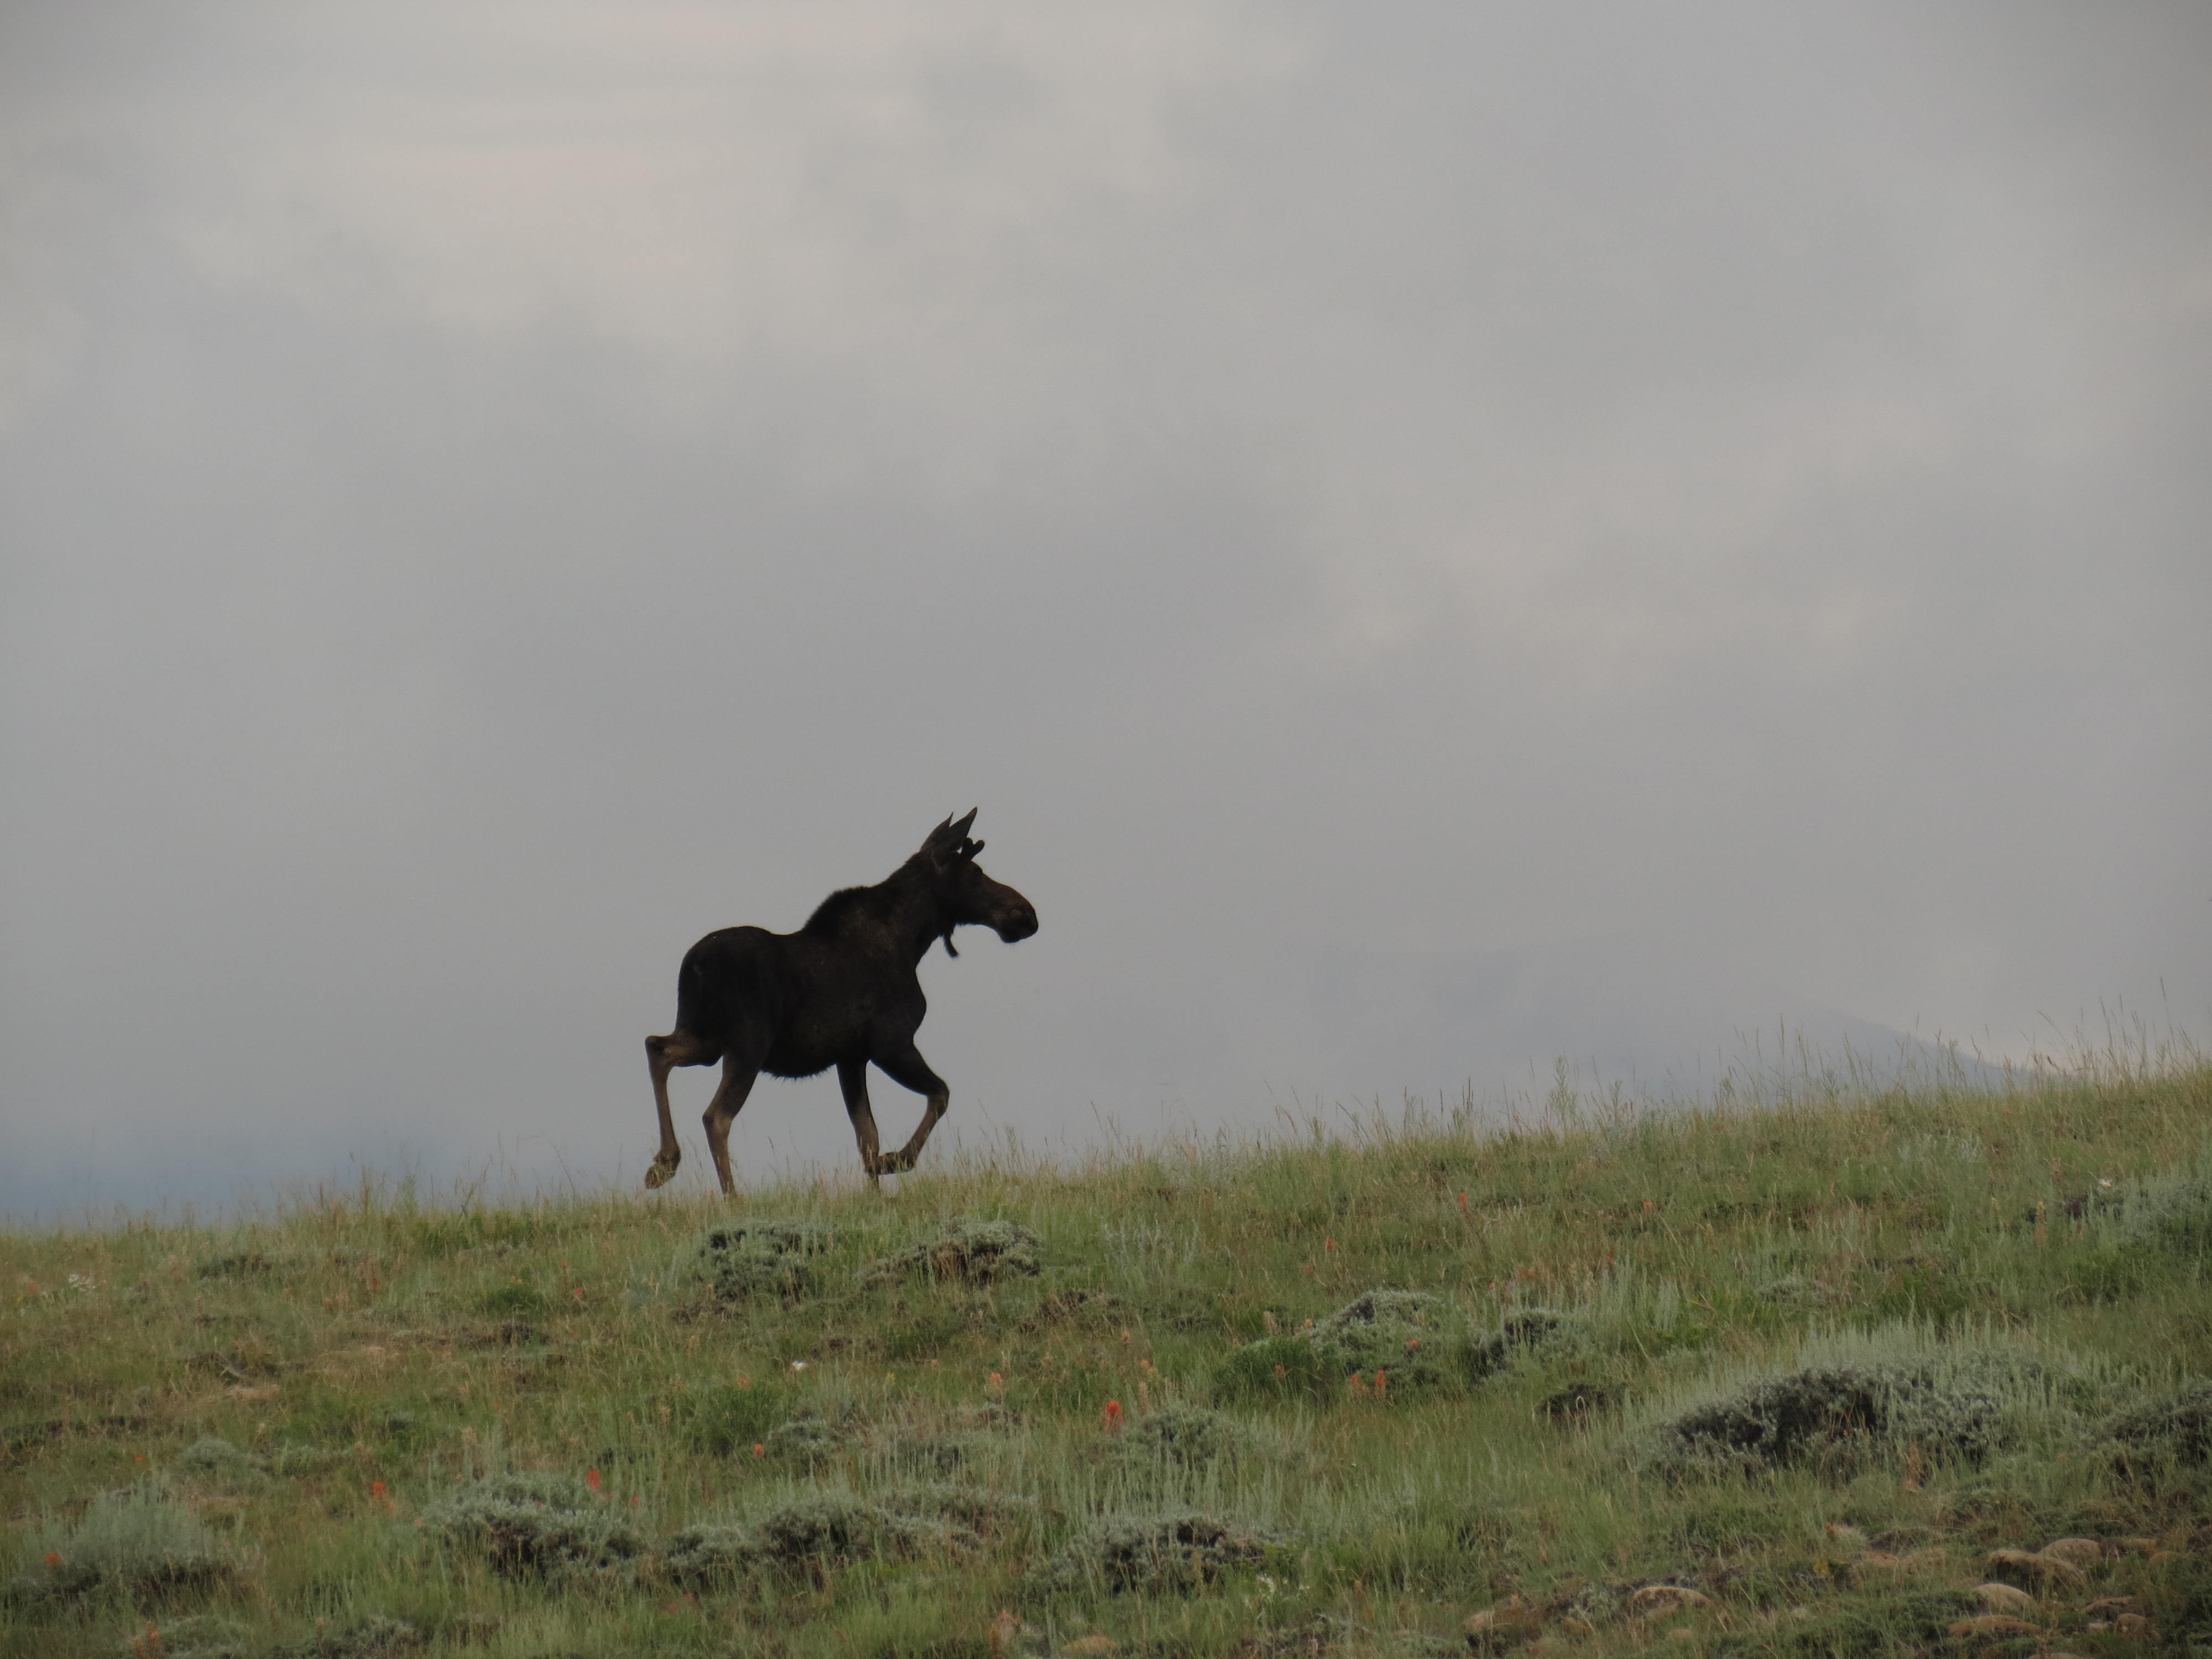 A silhouette of a moose against a cloudy background